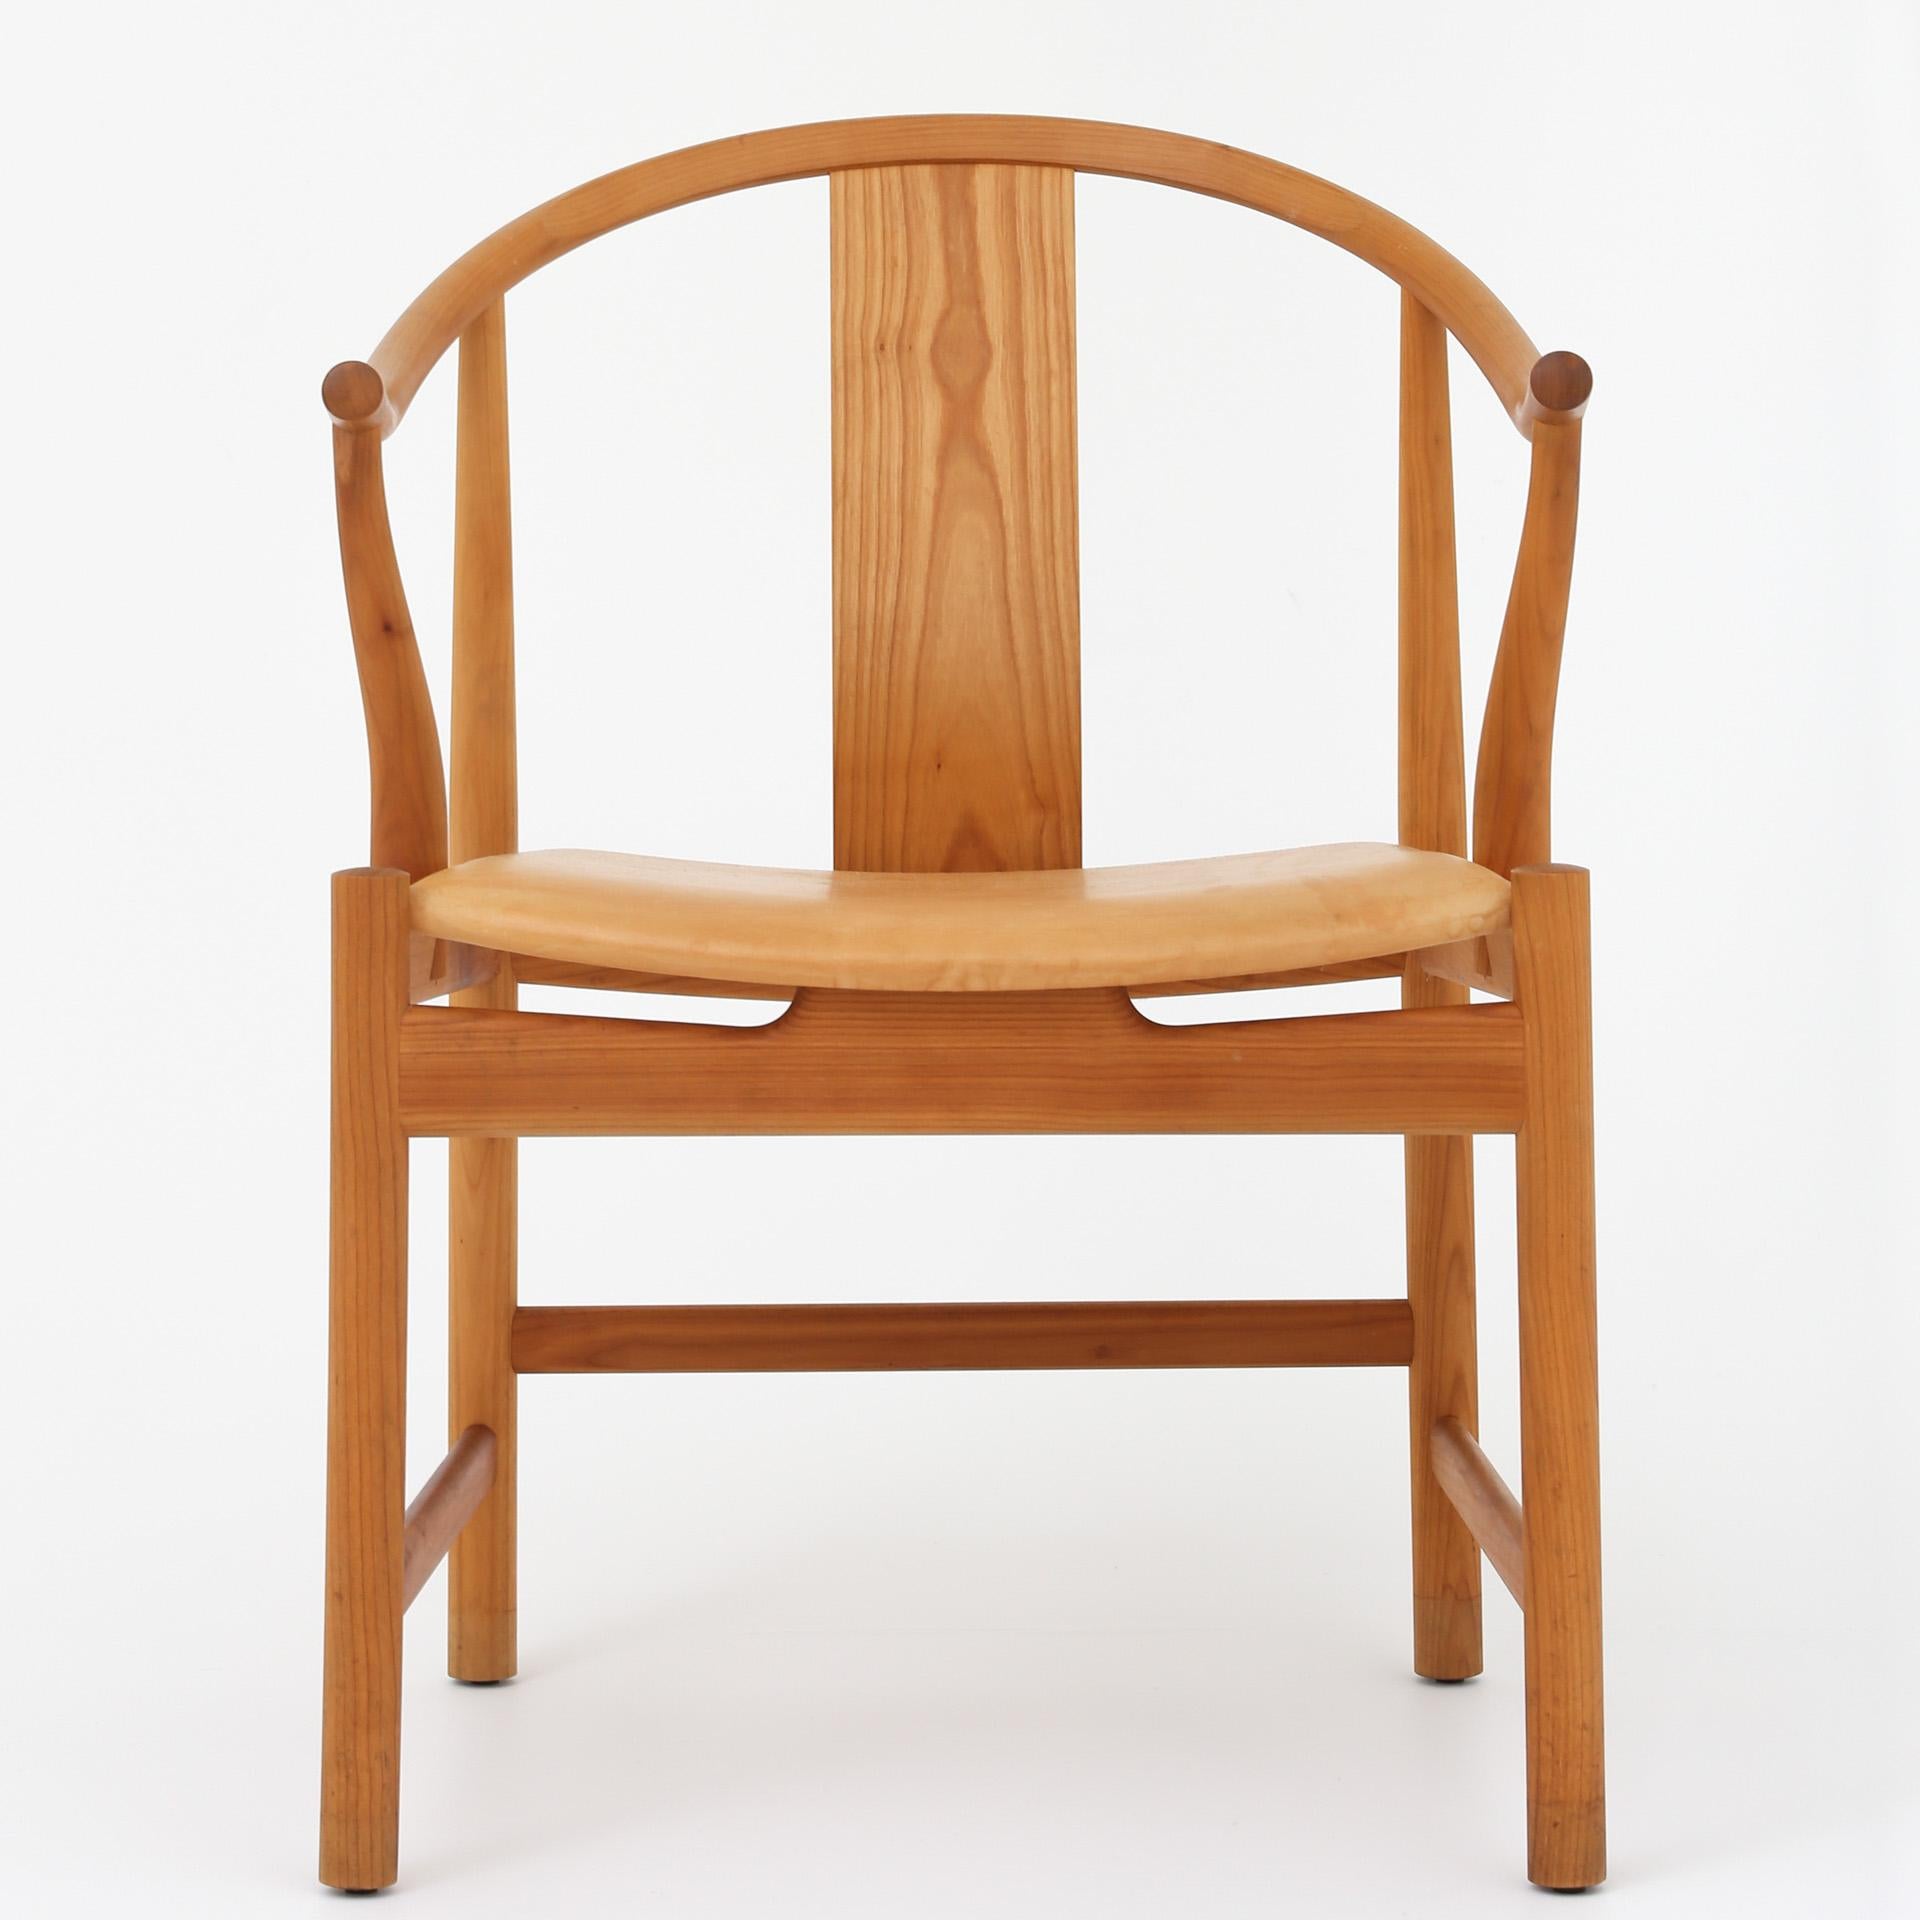 Set of 10 PP 56 China chairs in oiled cherry wood with seat in patinated natura.